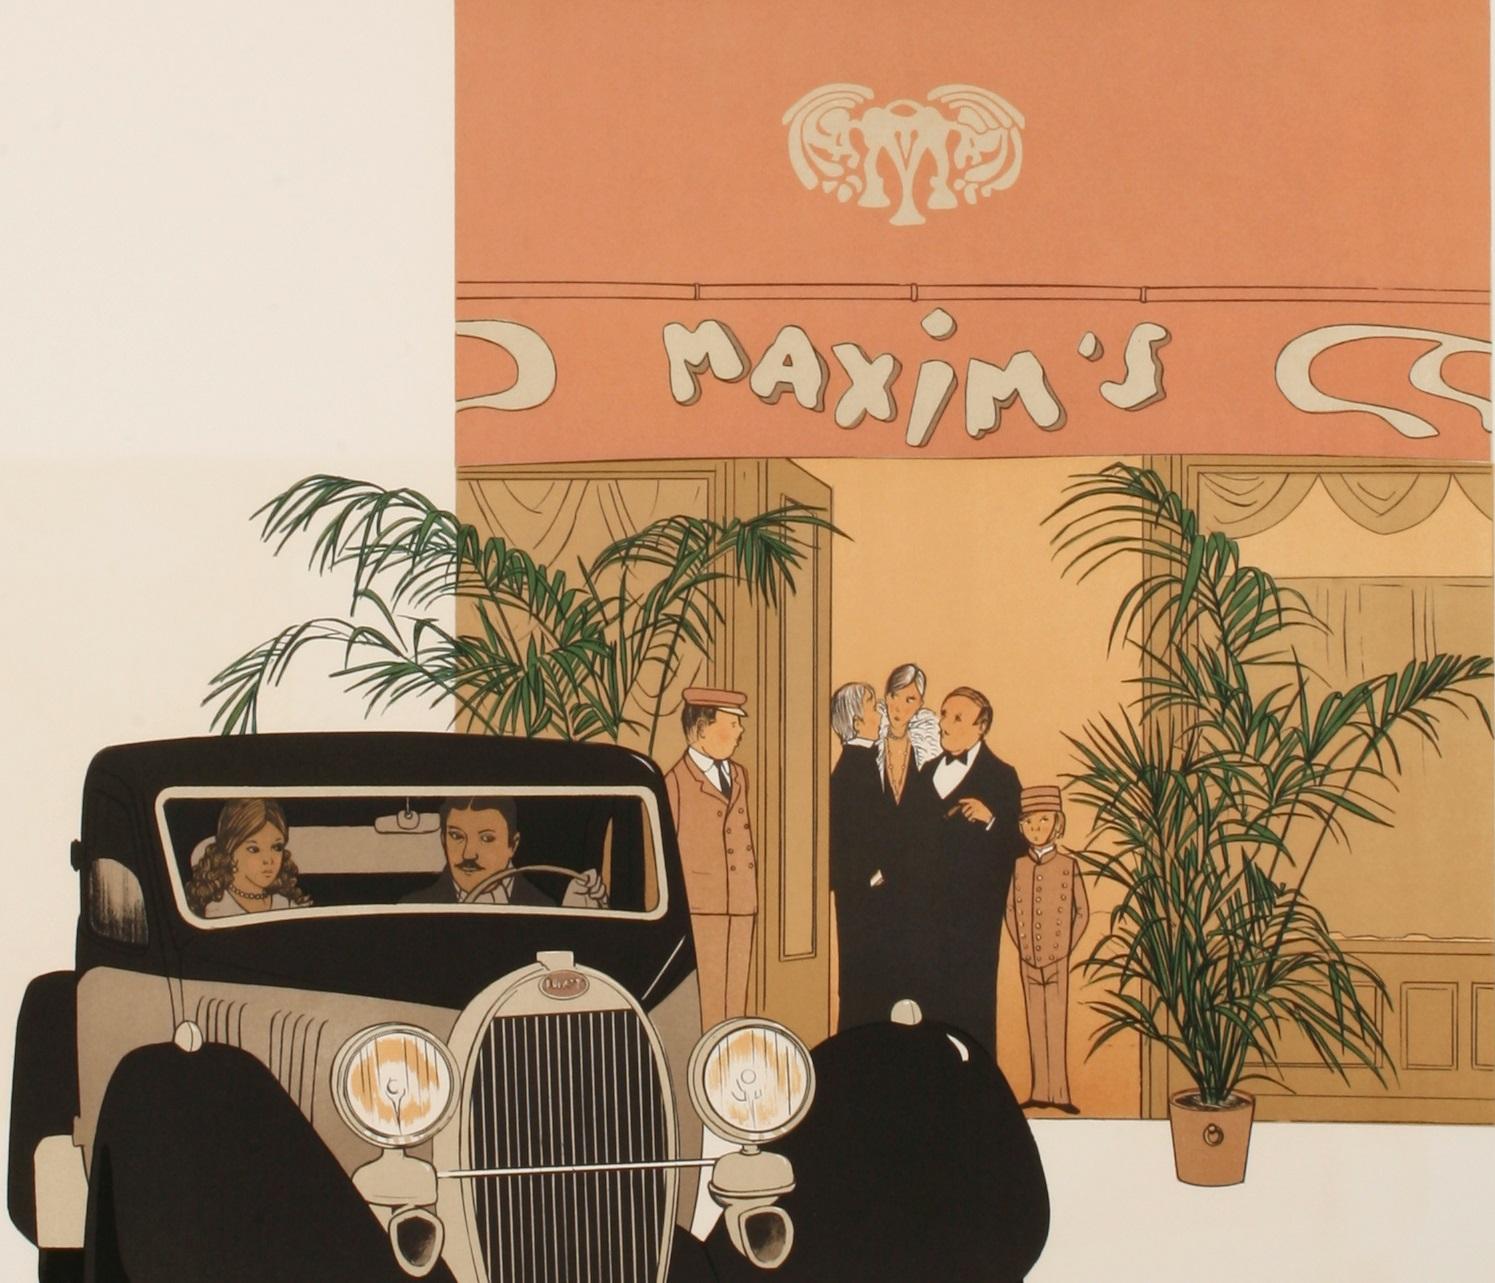 Original vintage poster-Noyer Denis-Paul-Maxim's-Restaurant-Paris, c.1979

The artist immerses us into the Paris of the 20s. A car is parked in front of Maxim's, famous restaurant of the rue Royale, in the district of the Madeleine, Paris.
The